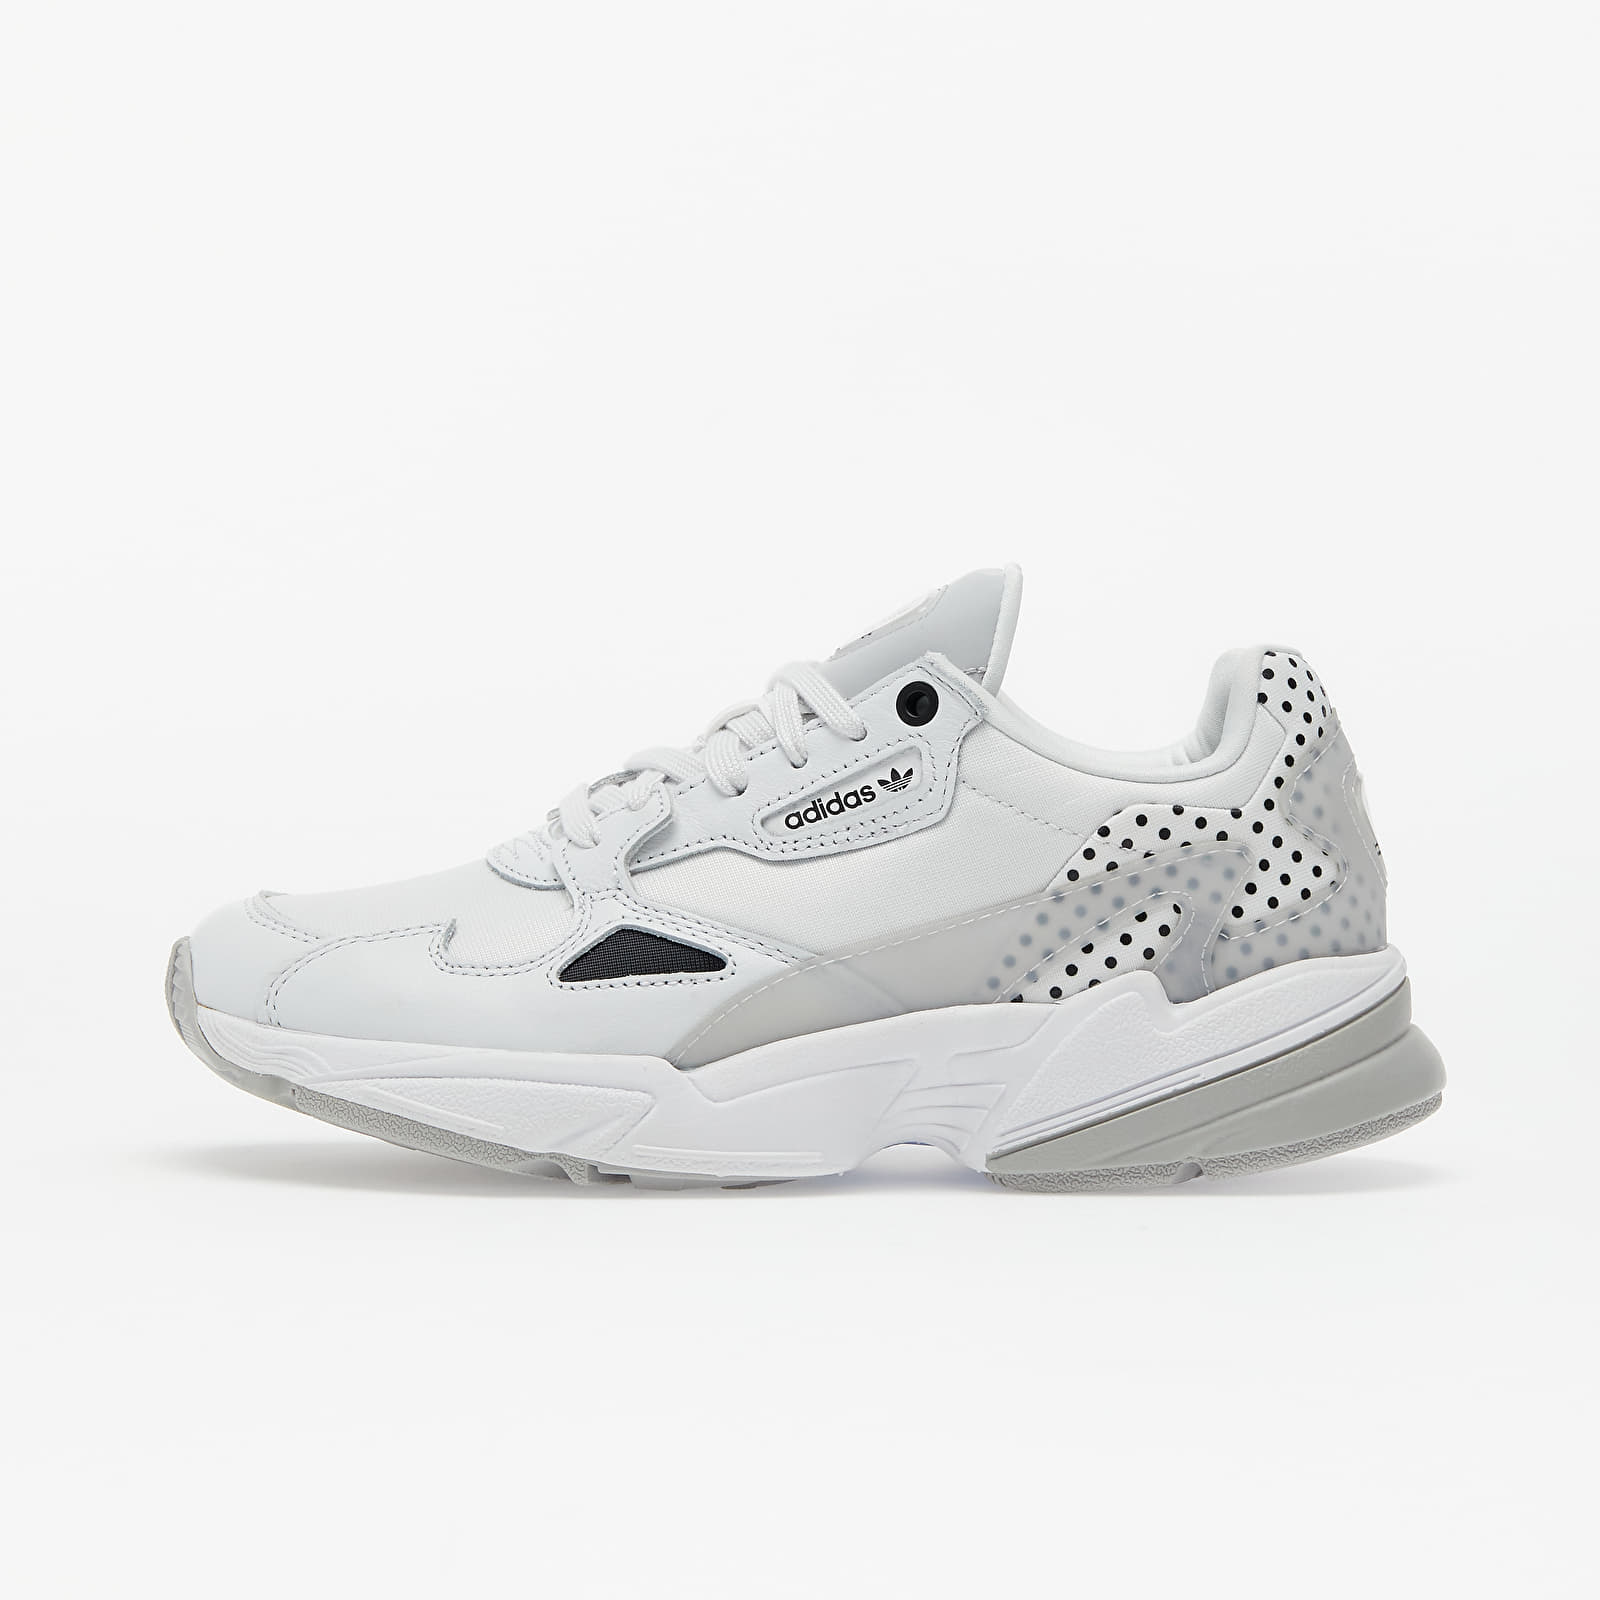 Chaussures et baskets femme adidas Falcon W Crystal White/ Core Black/ Grey Two